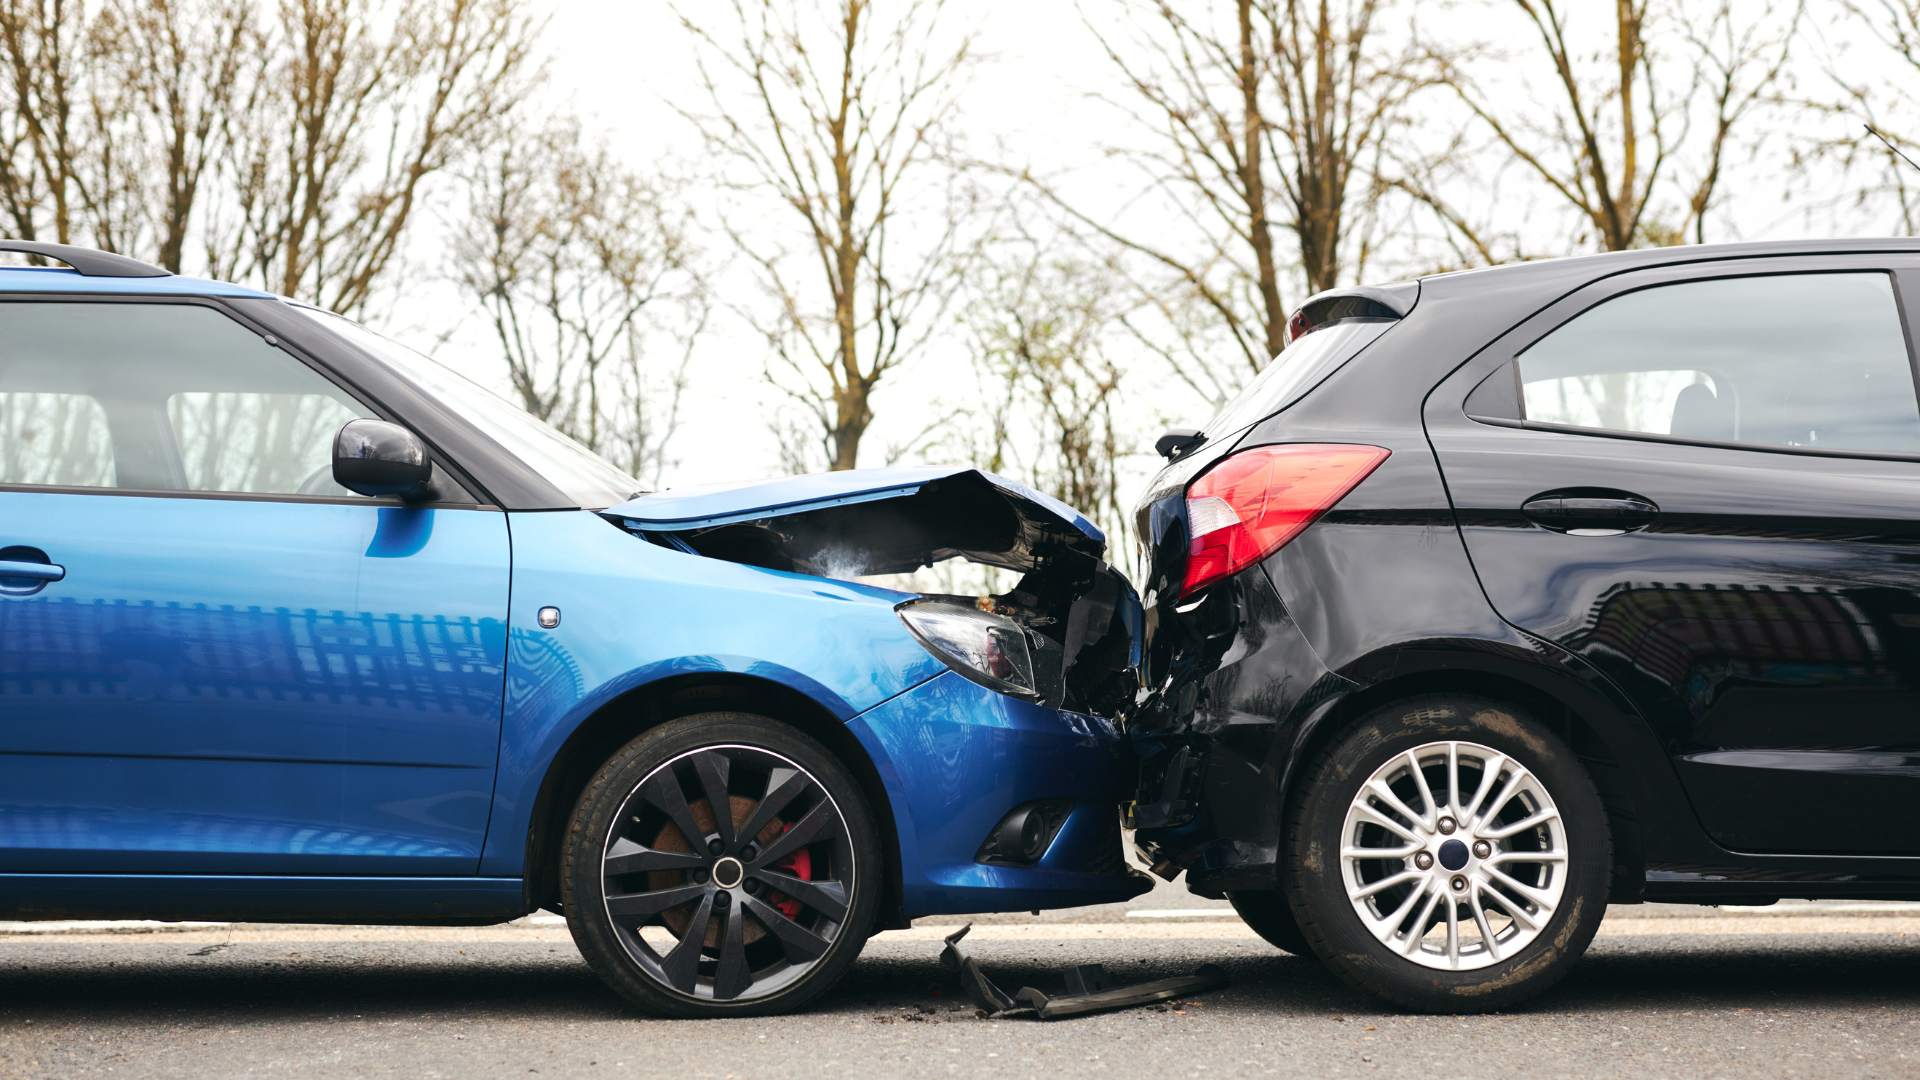 What Actions Should You Take Immediately After a Car Accident?